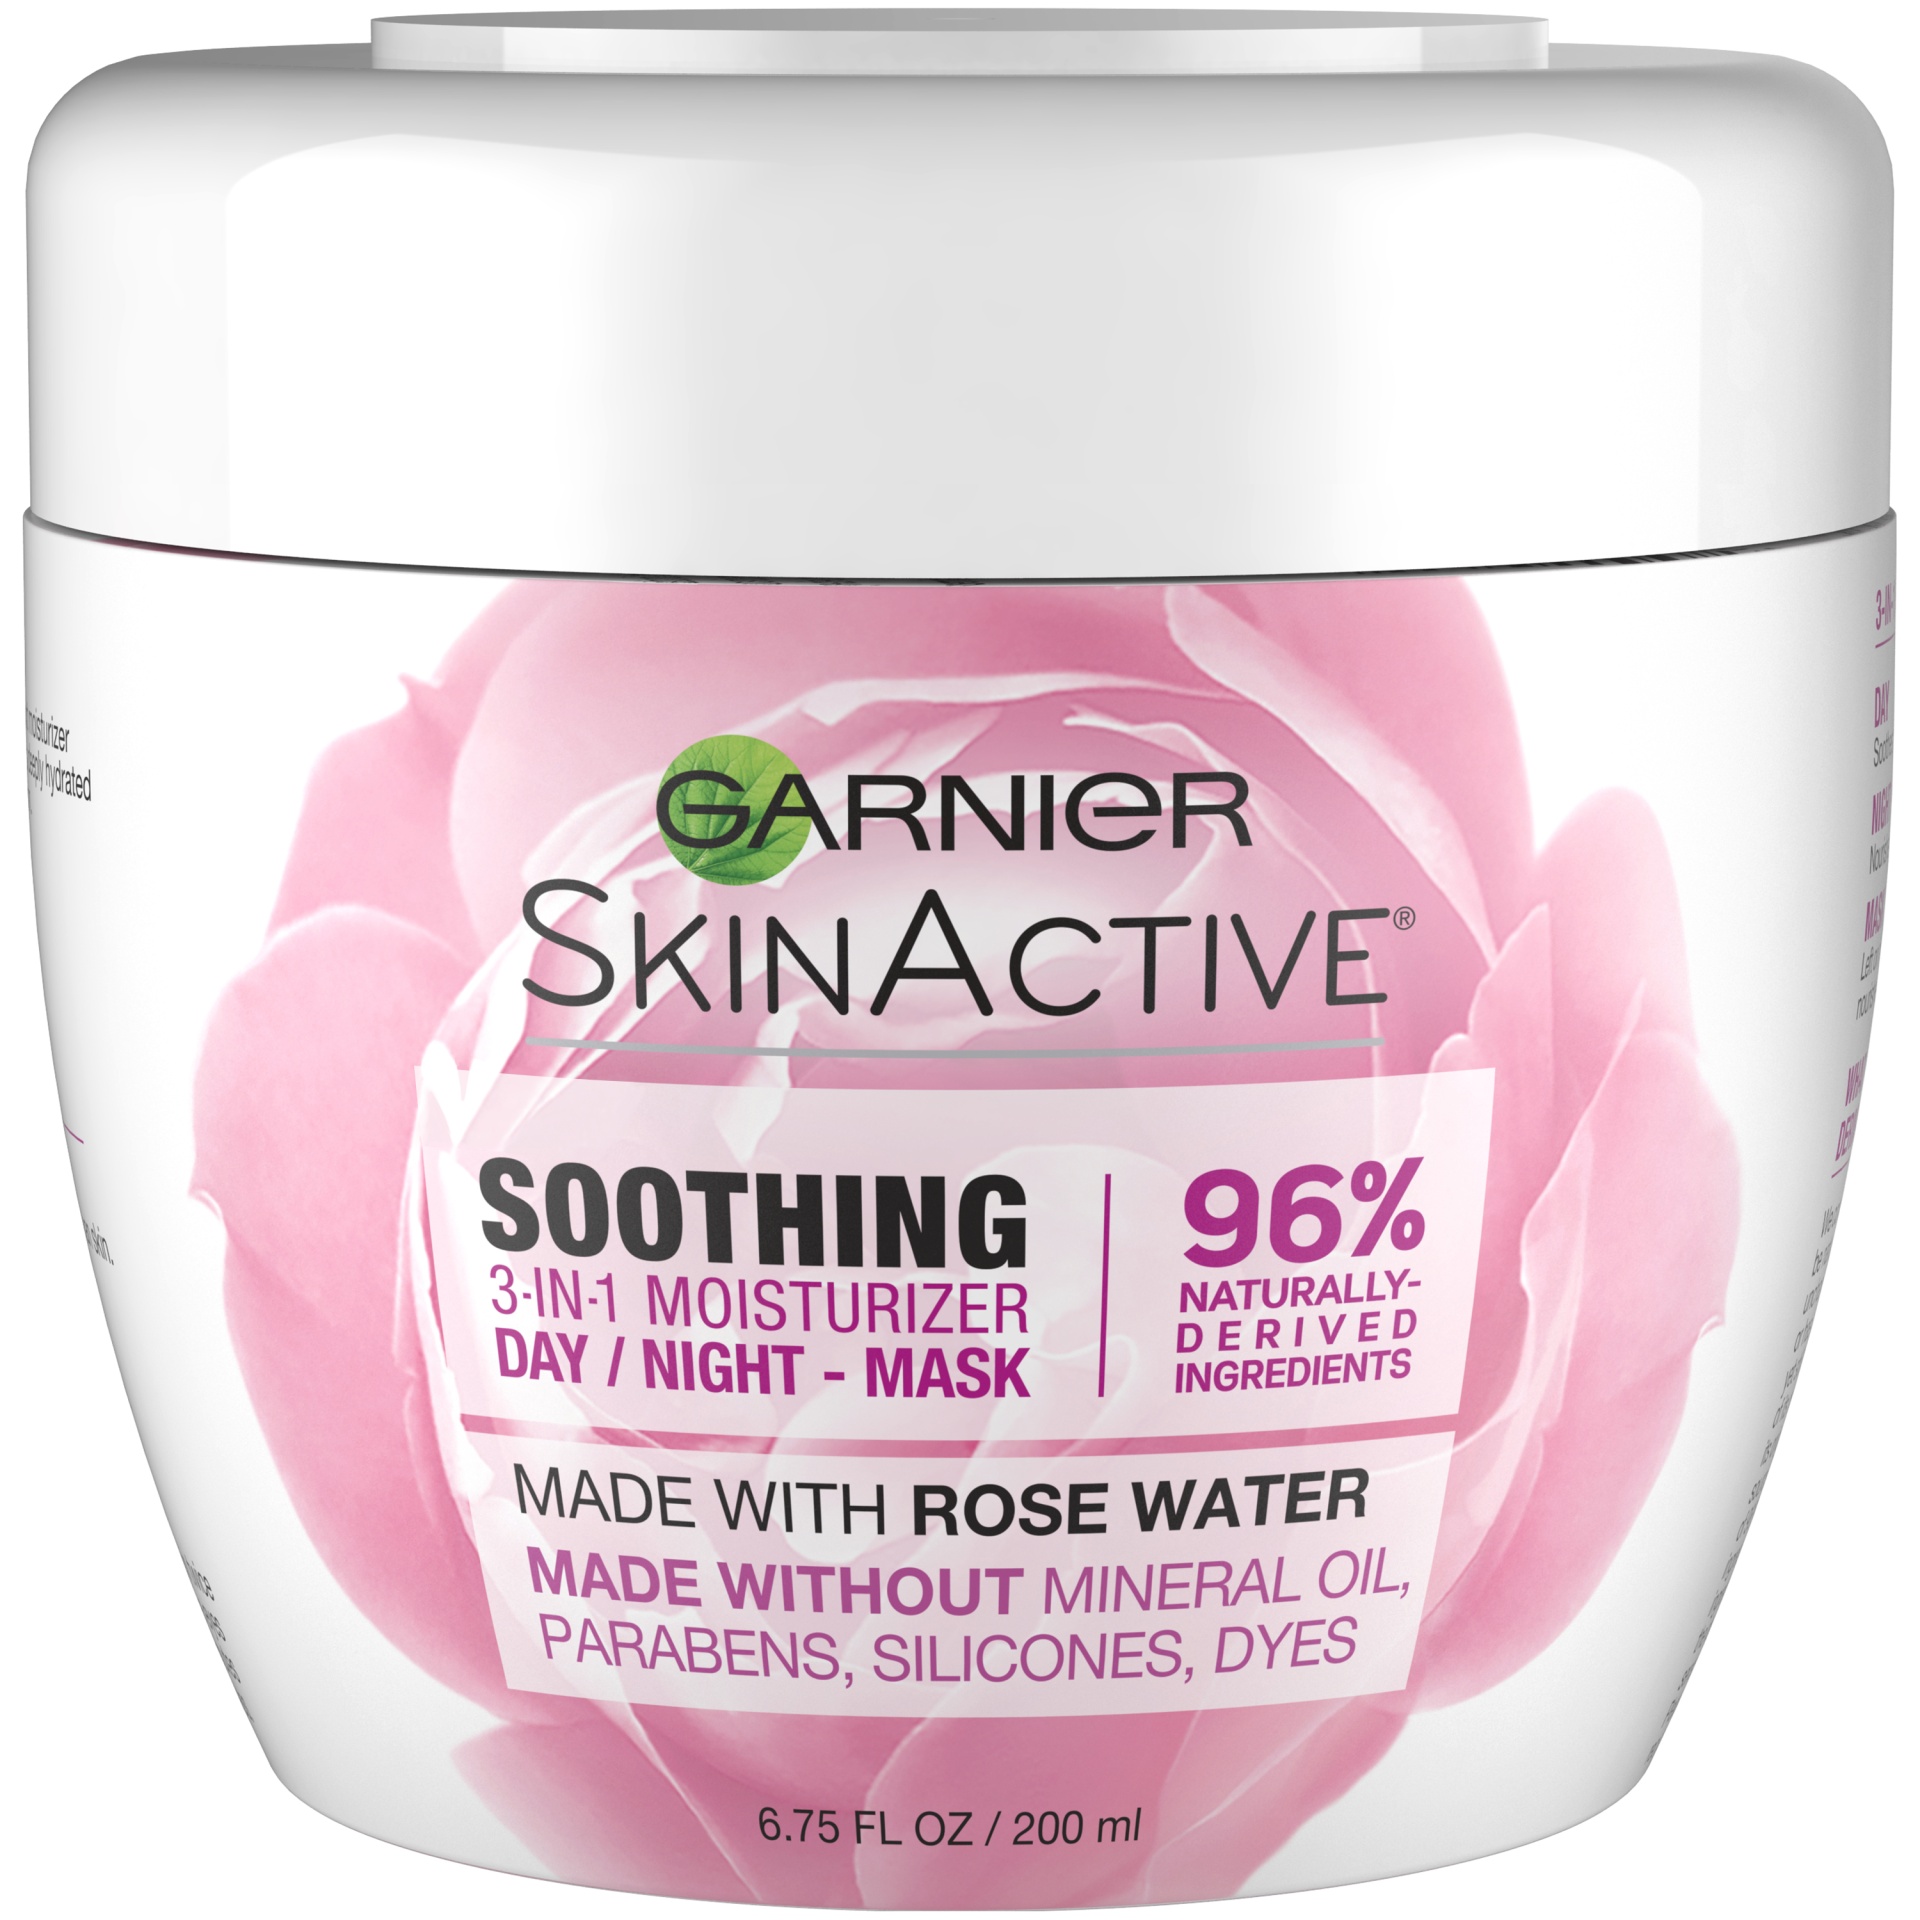 slide 2 of 2, Garnier Skinactive Soothing 3-In-1 Moisturizer Day / Night Mask With Rose Water, 6.75 fl oz